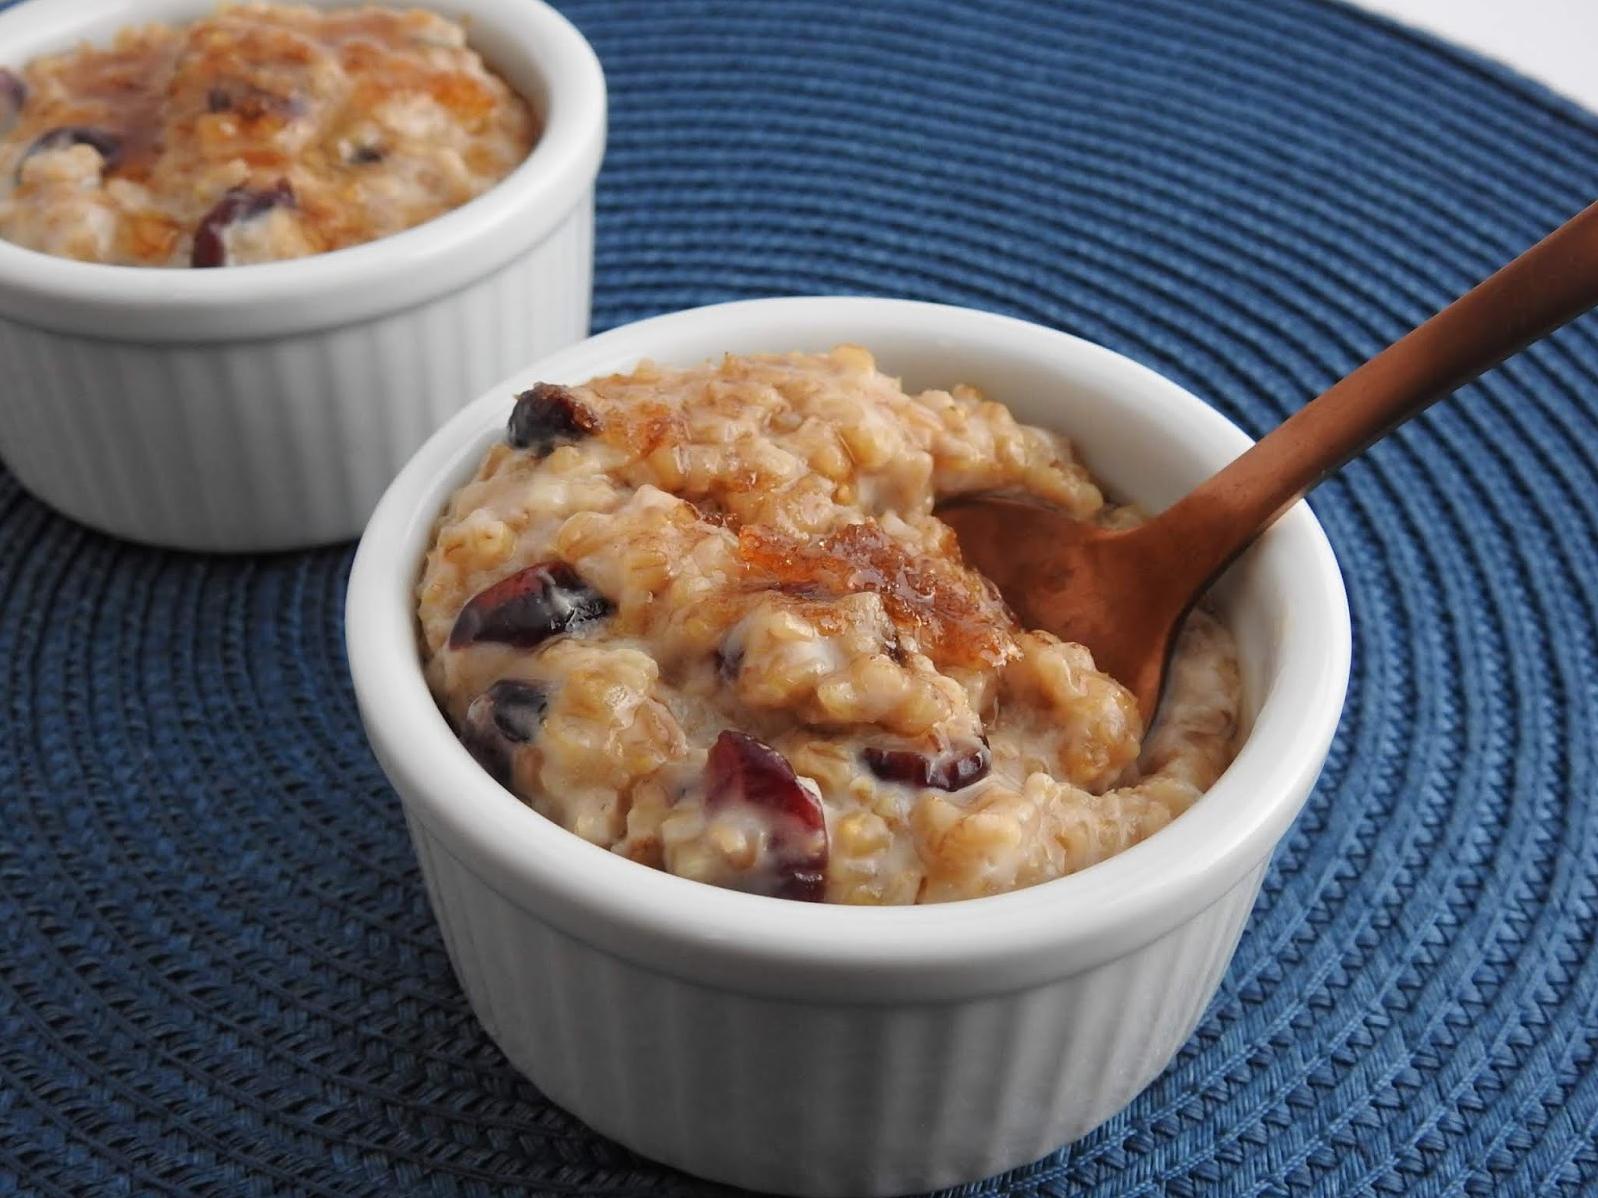  Start your morning off right with a bowl of bruleed oatmeal.